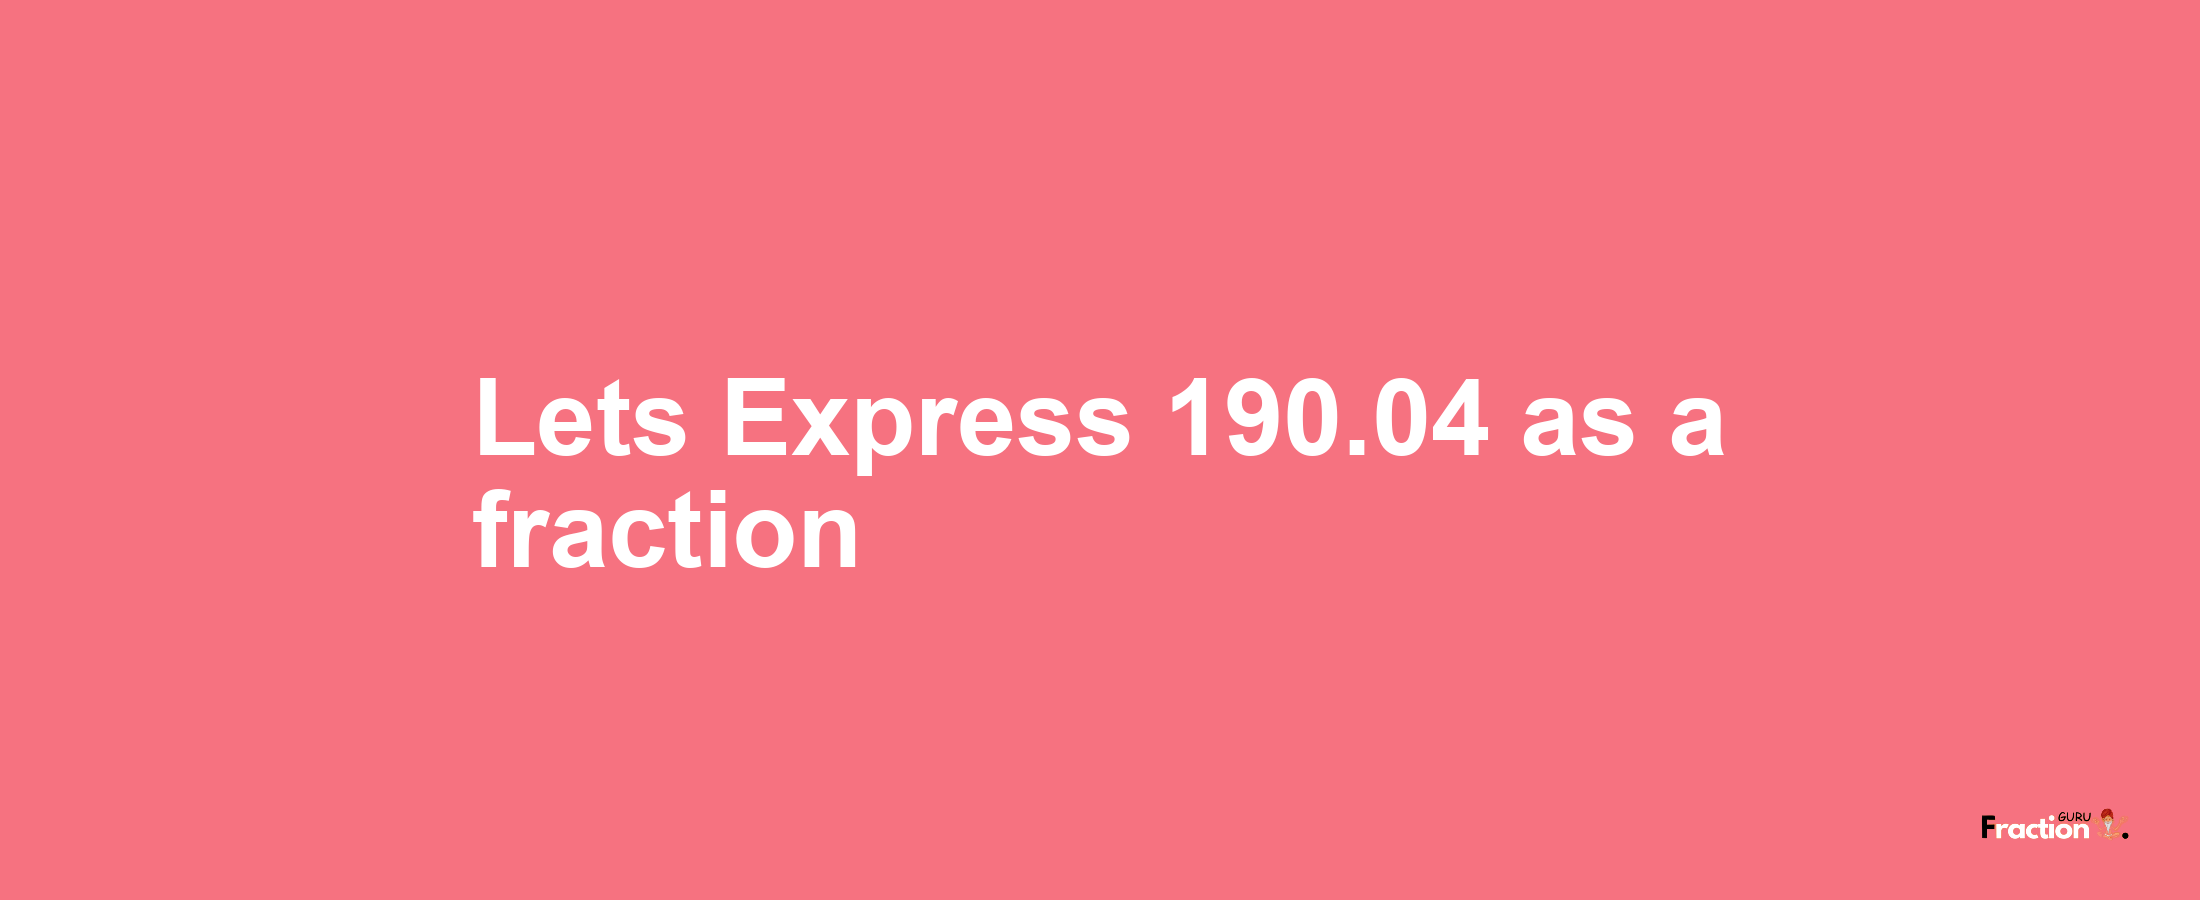 Lets Express 190.04 as afraction